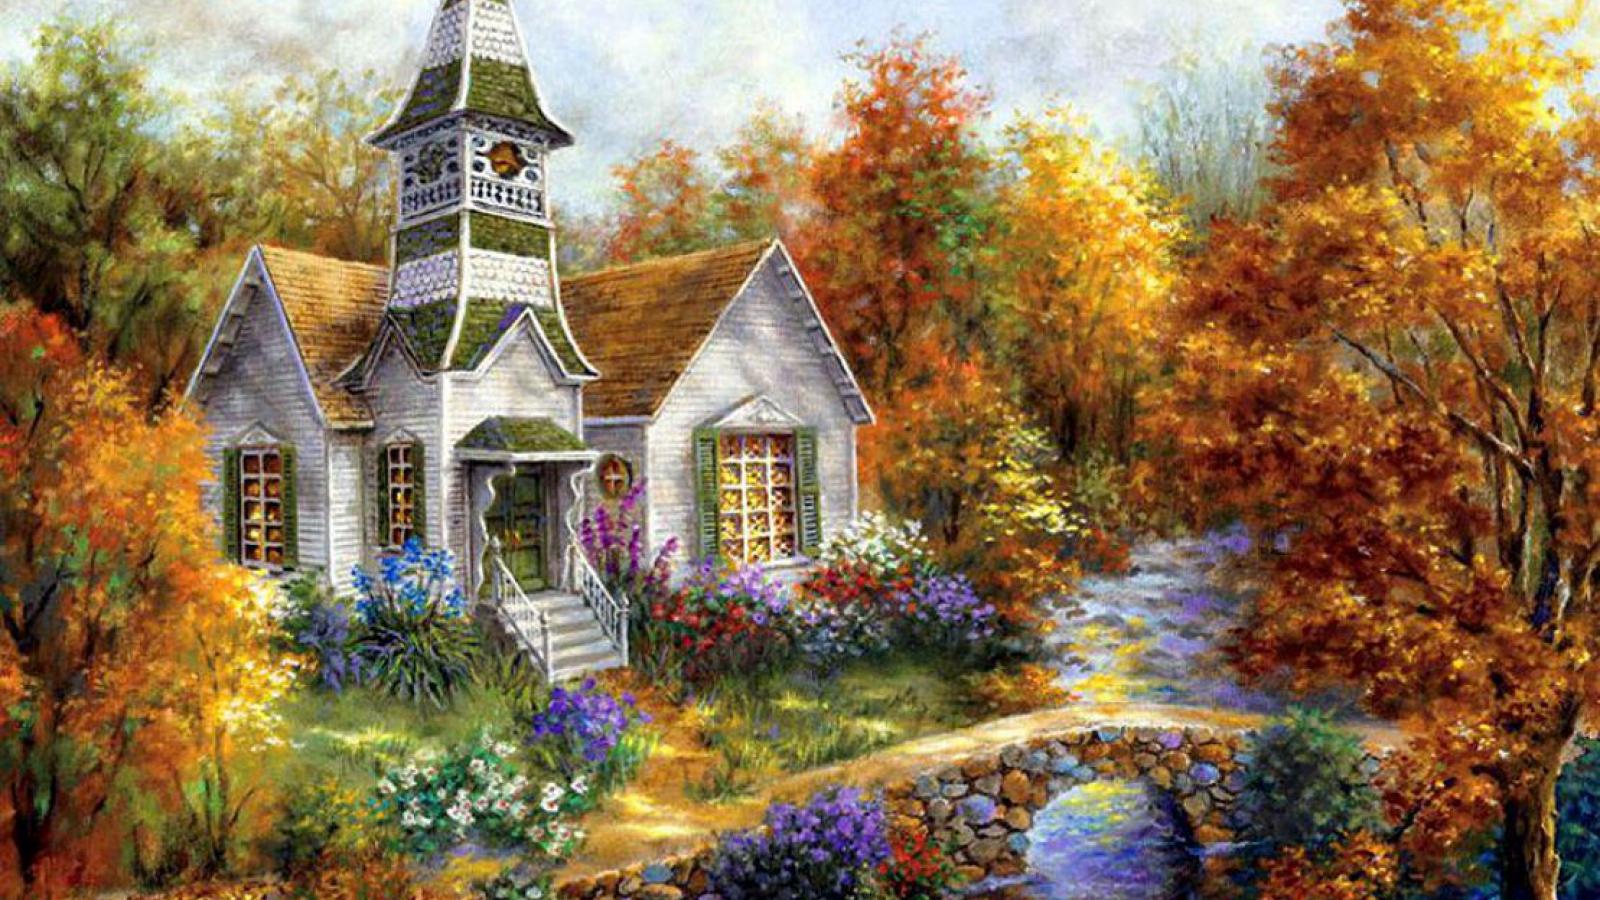 Cottage In The Cloud Forest Wallpaper Car Pictures